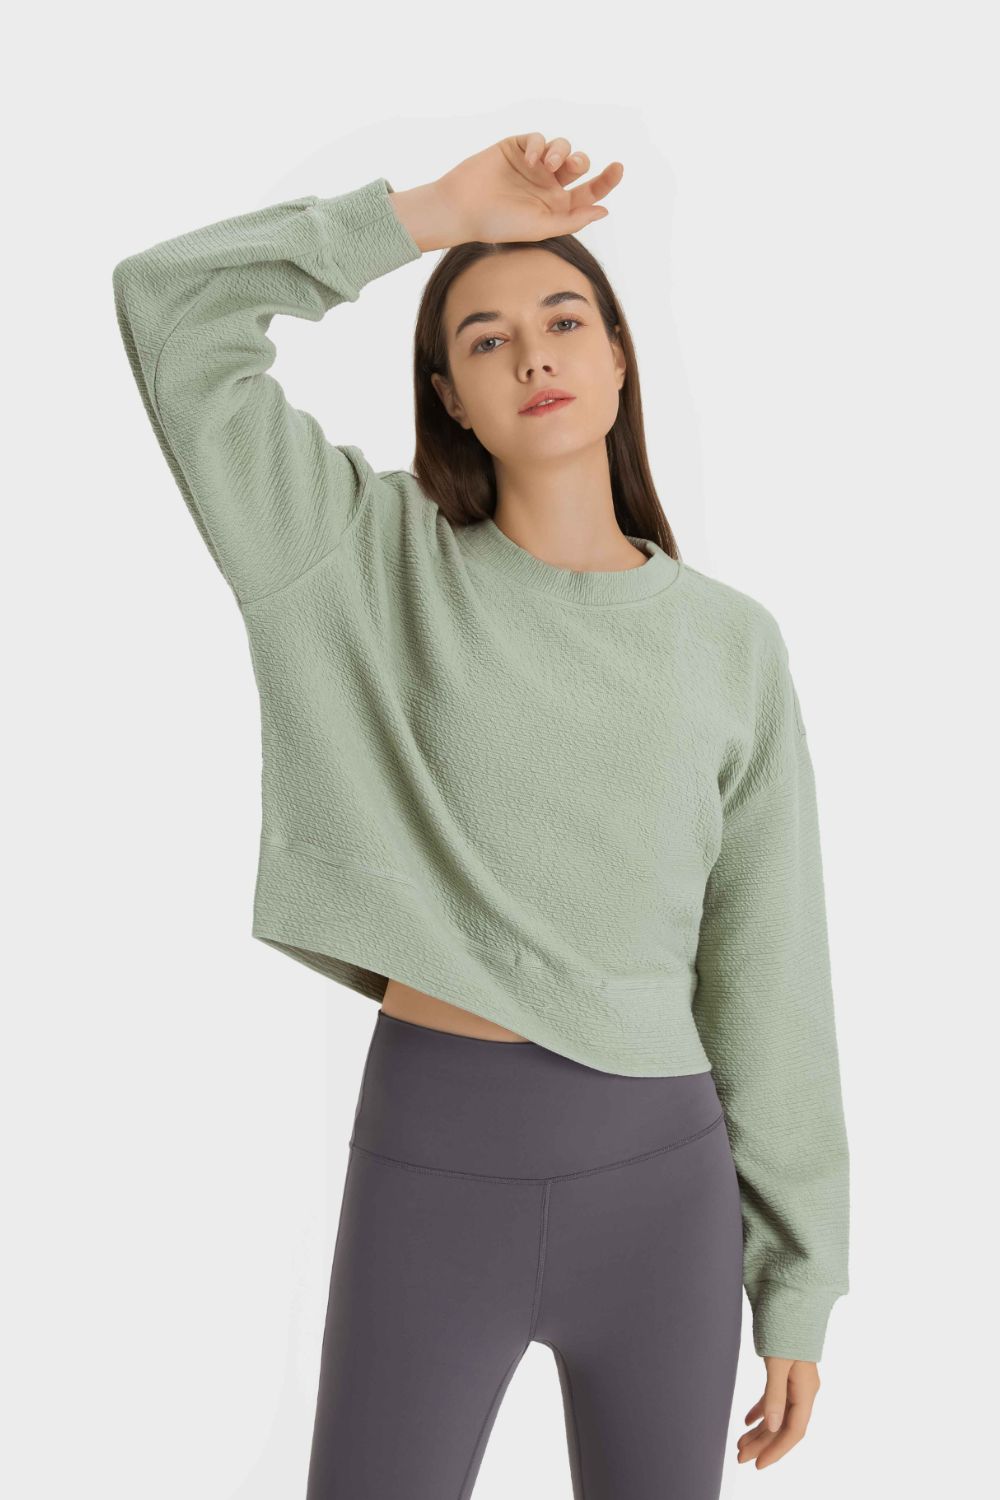 Textured Dropped Shoulder Sports Top